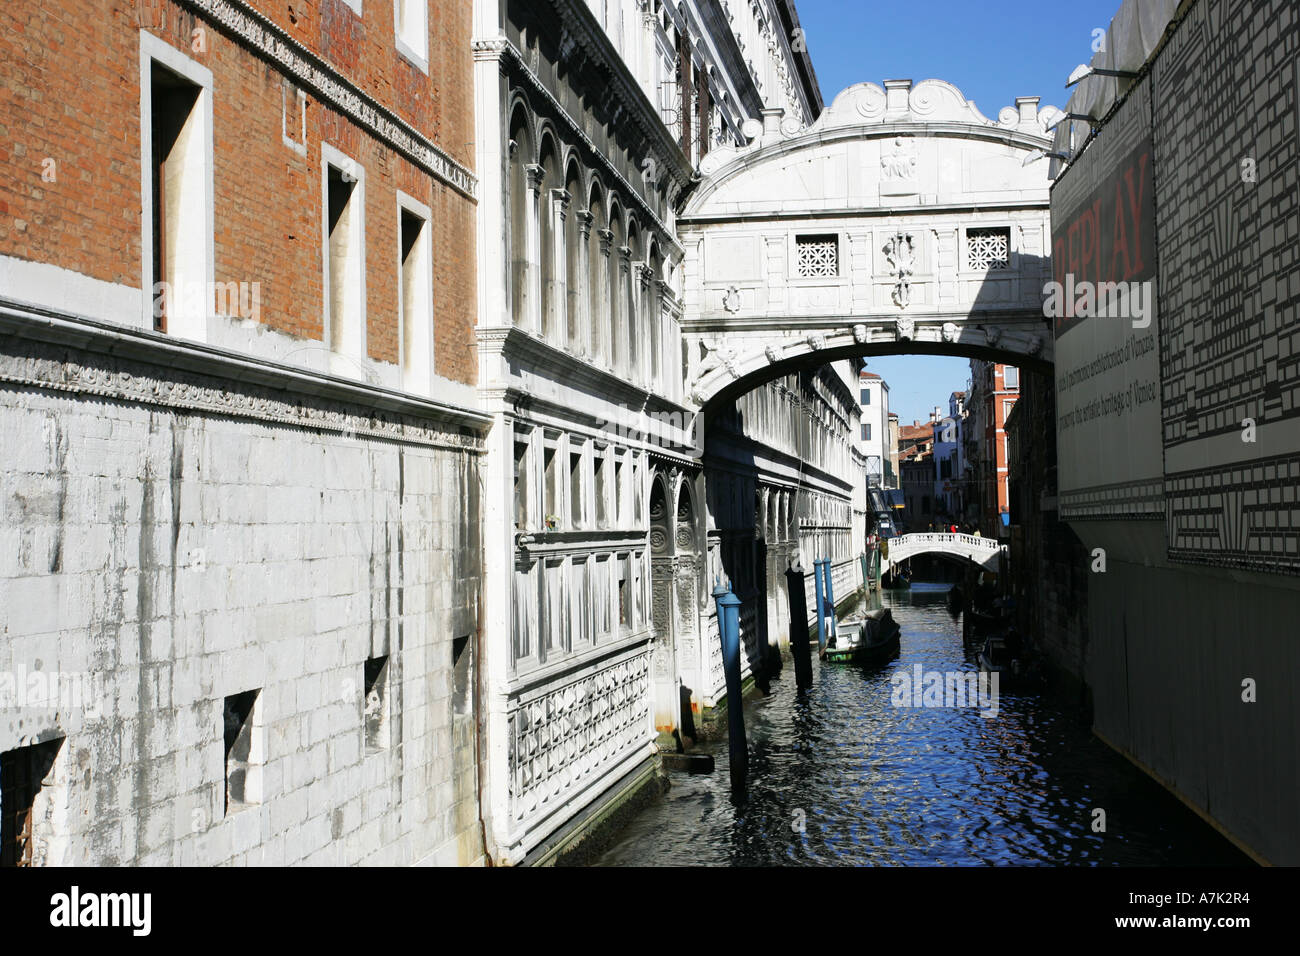 World famous architecture of the Bridge of Sighs Ponte dei Sospiri spanning a tyical Venice waterway near Grand Canal Italy EU Stock Photo